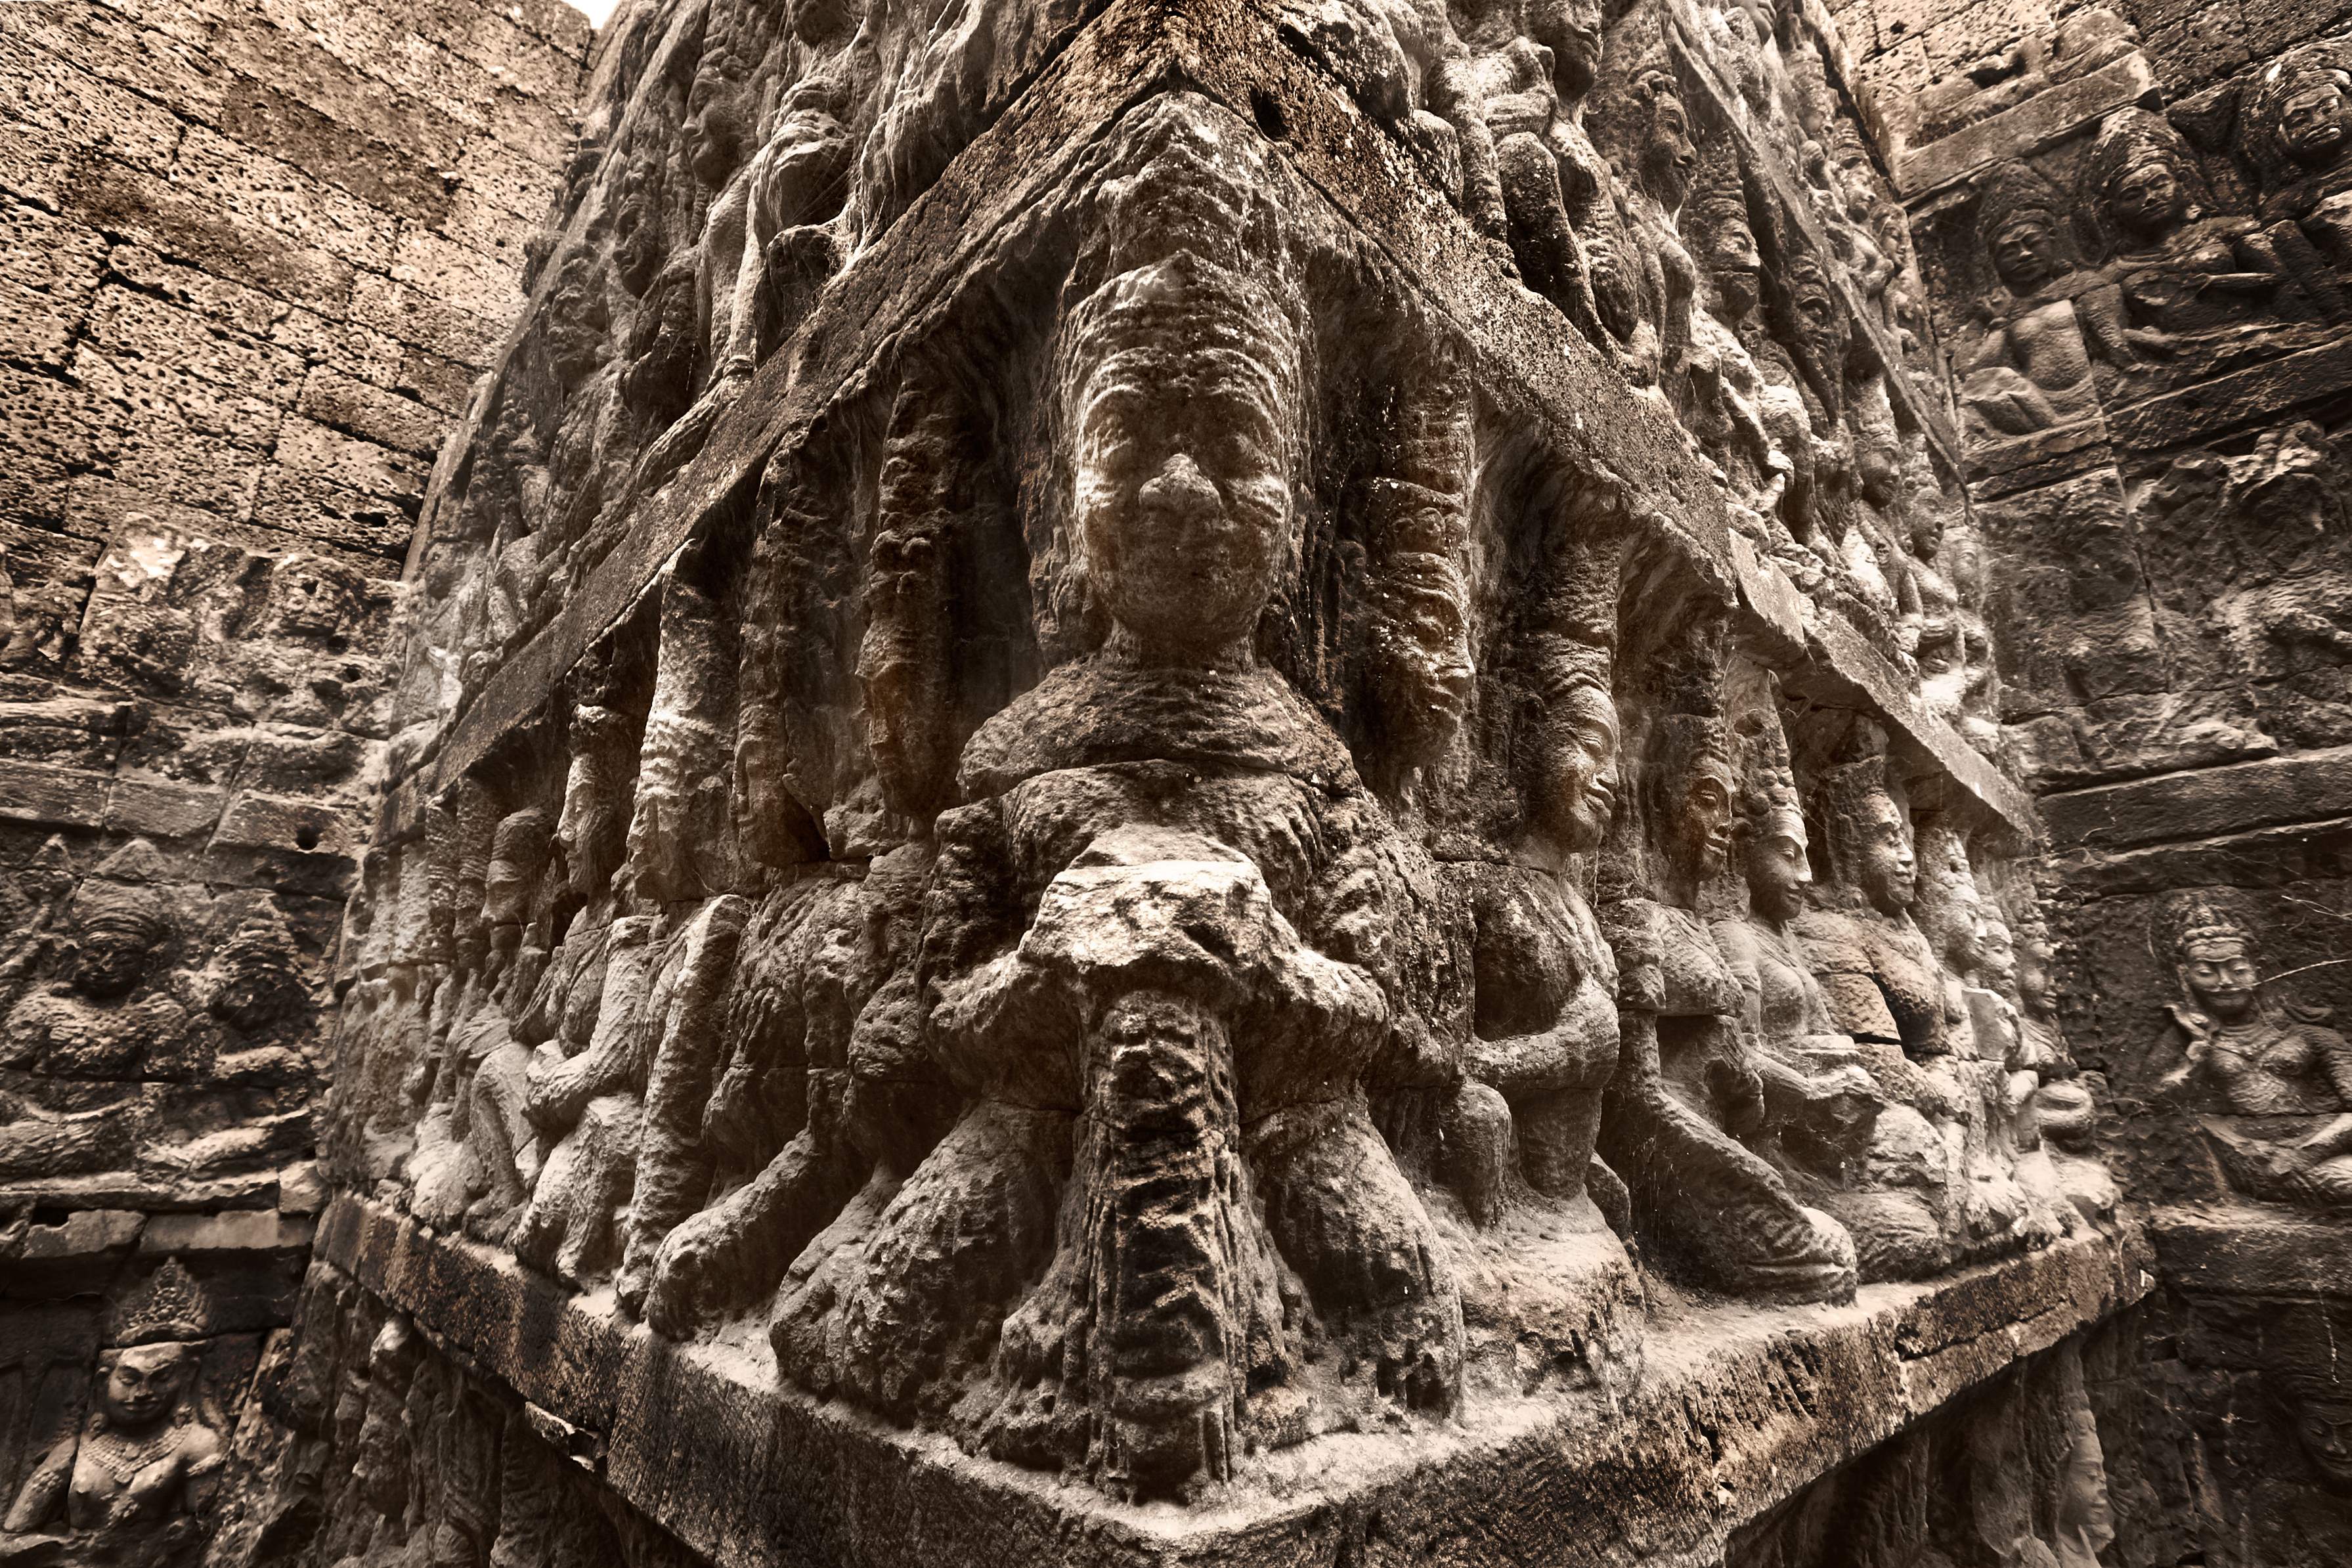 Wall stone of King terrace in Angkor Thom